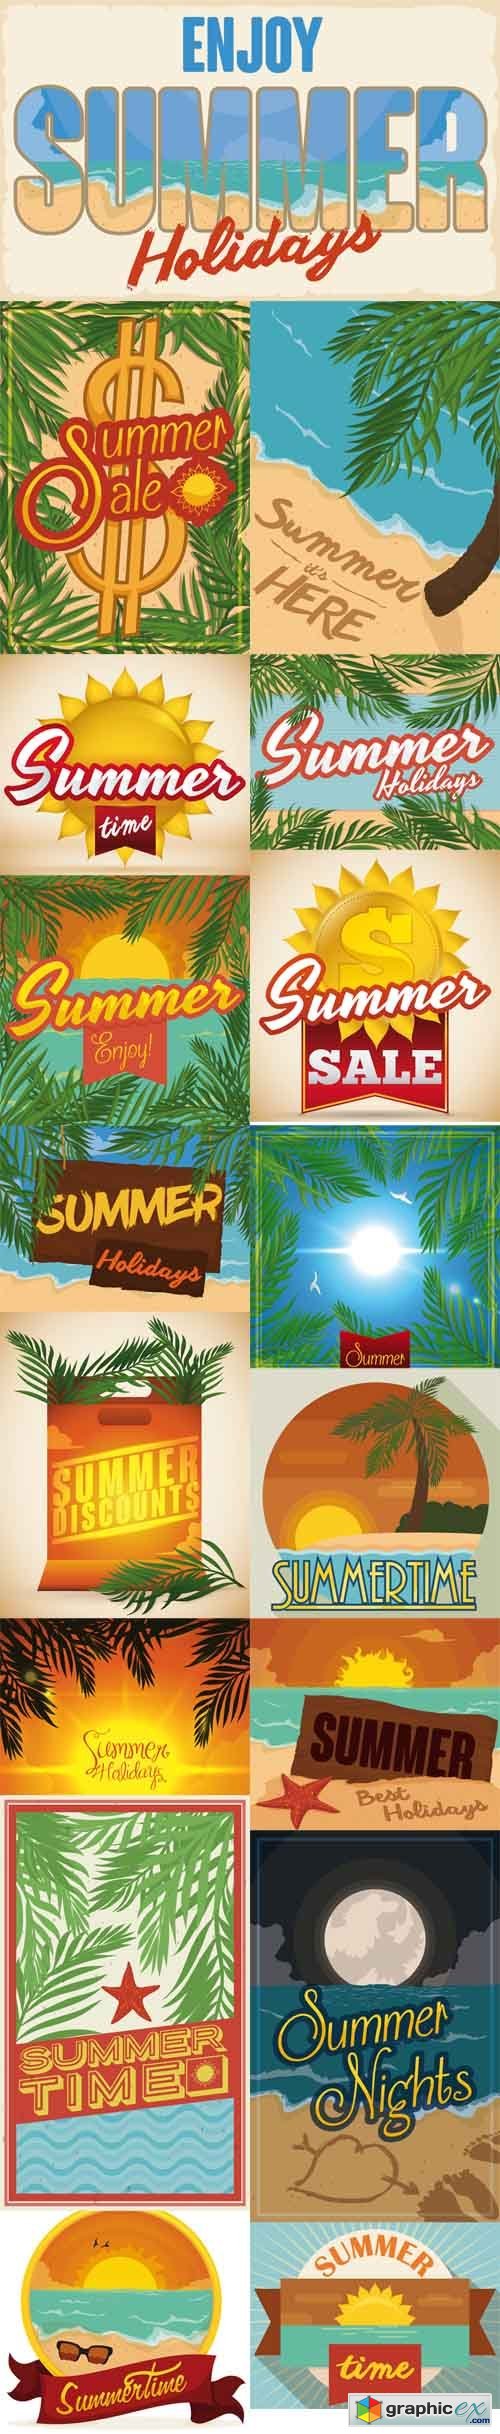 Summertime Banners on Beach and Palm Trees